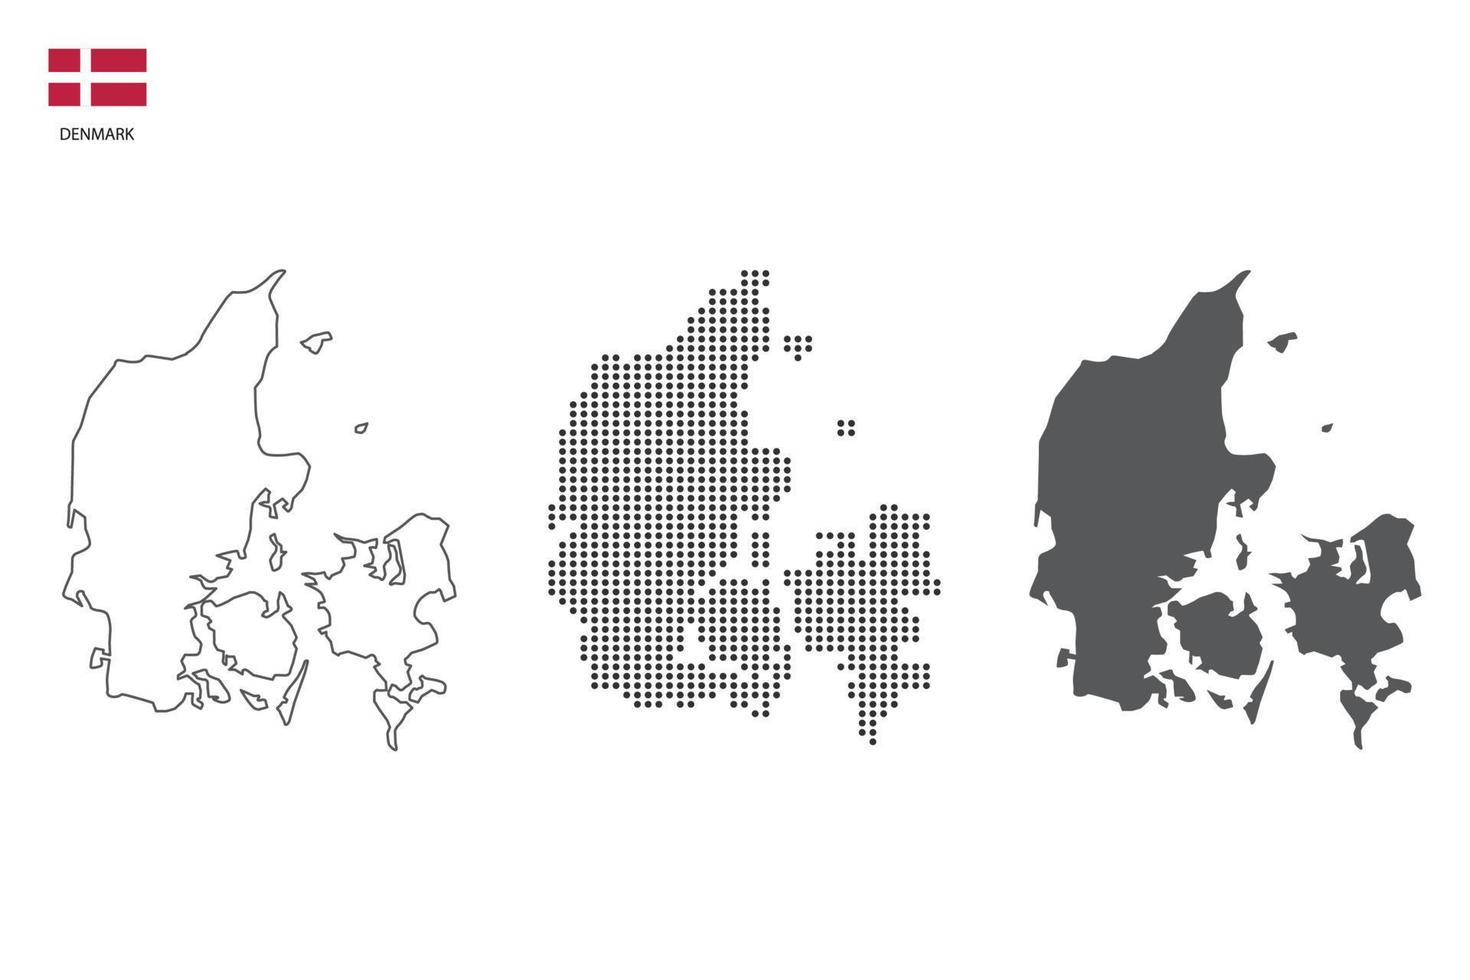 3 versions of Denmark map city vector by thin black outline simplicity style, Black dot style and Dark shadow style. All in the white background.